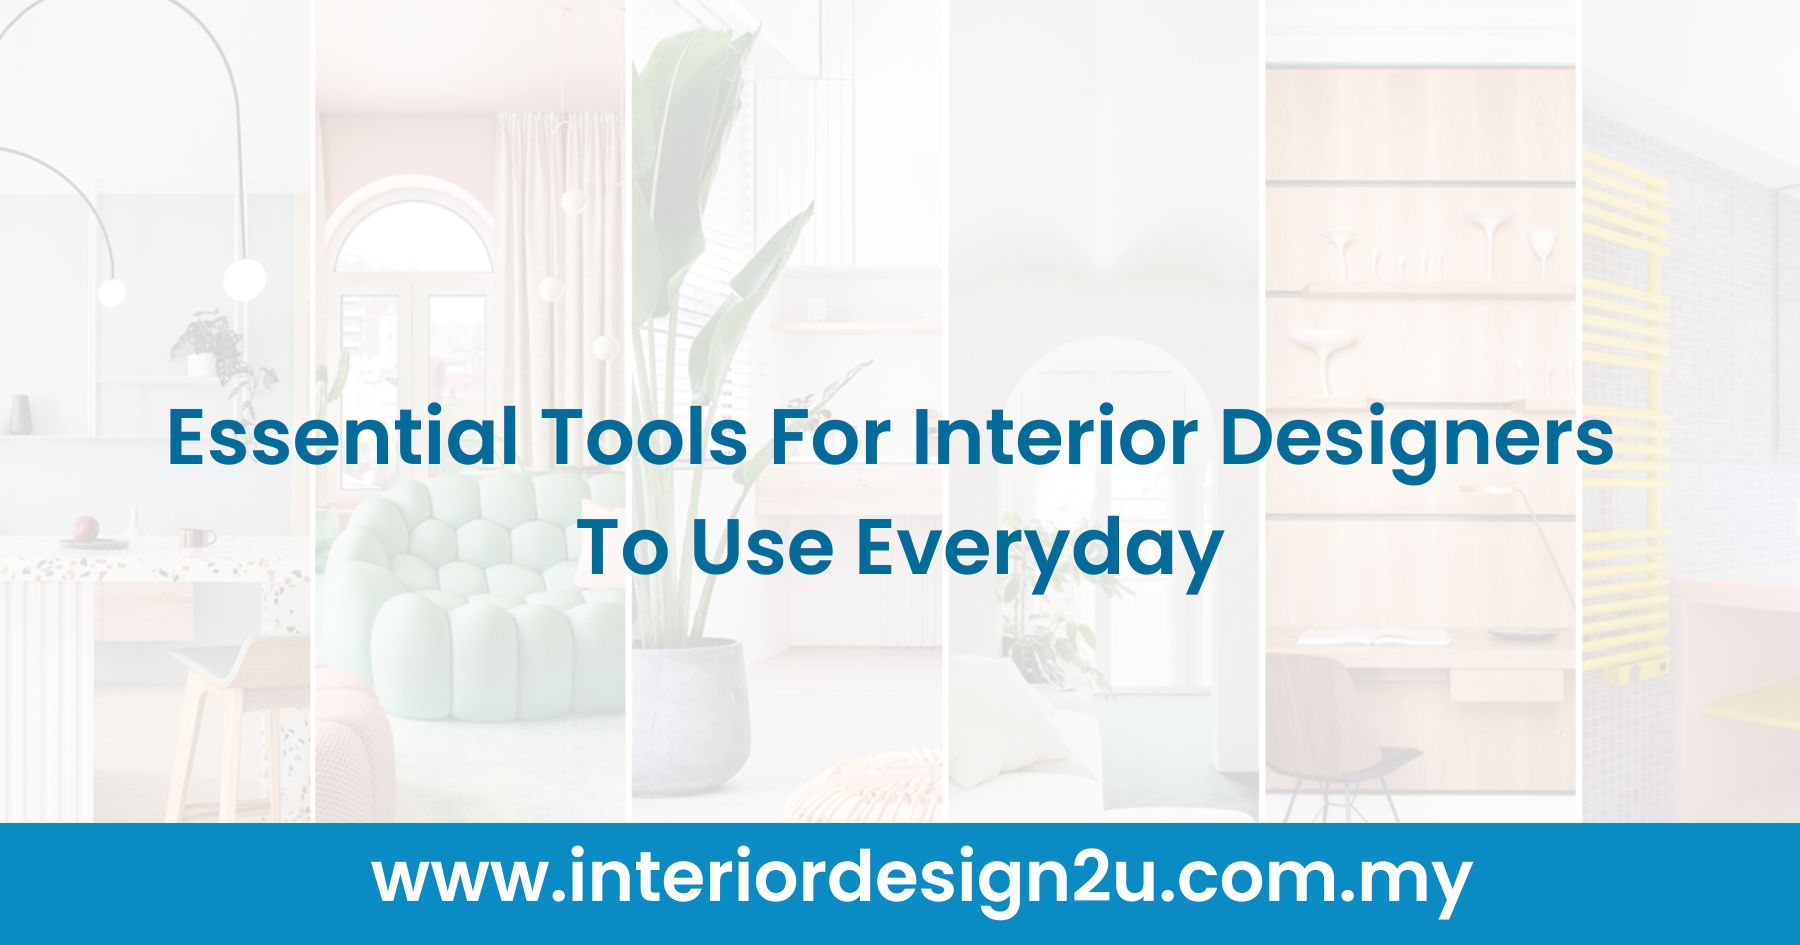 Essential Tools For Interior Designers To Use Everyday